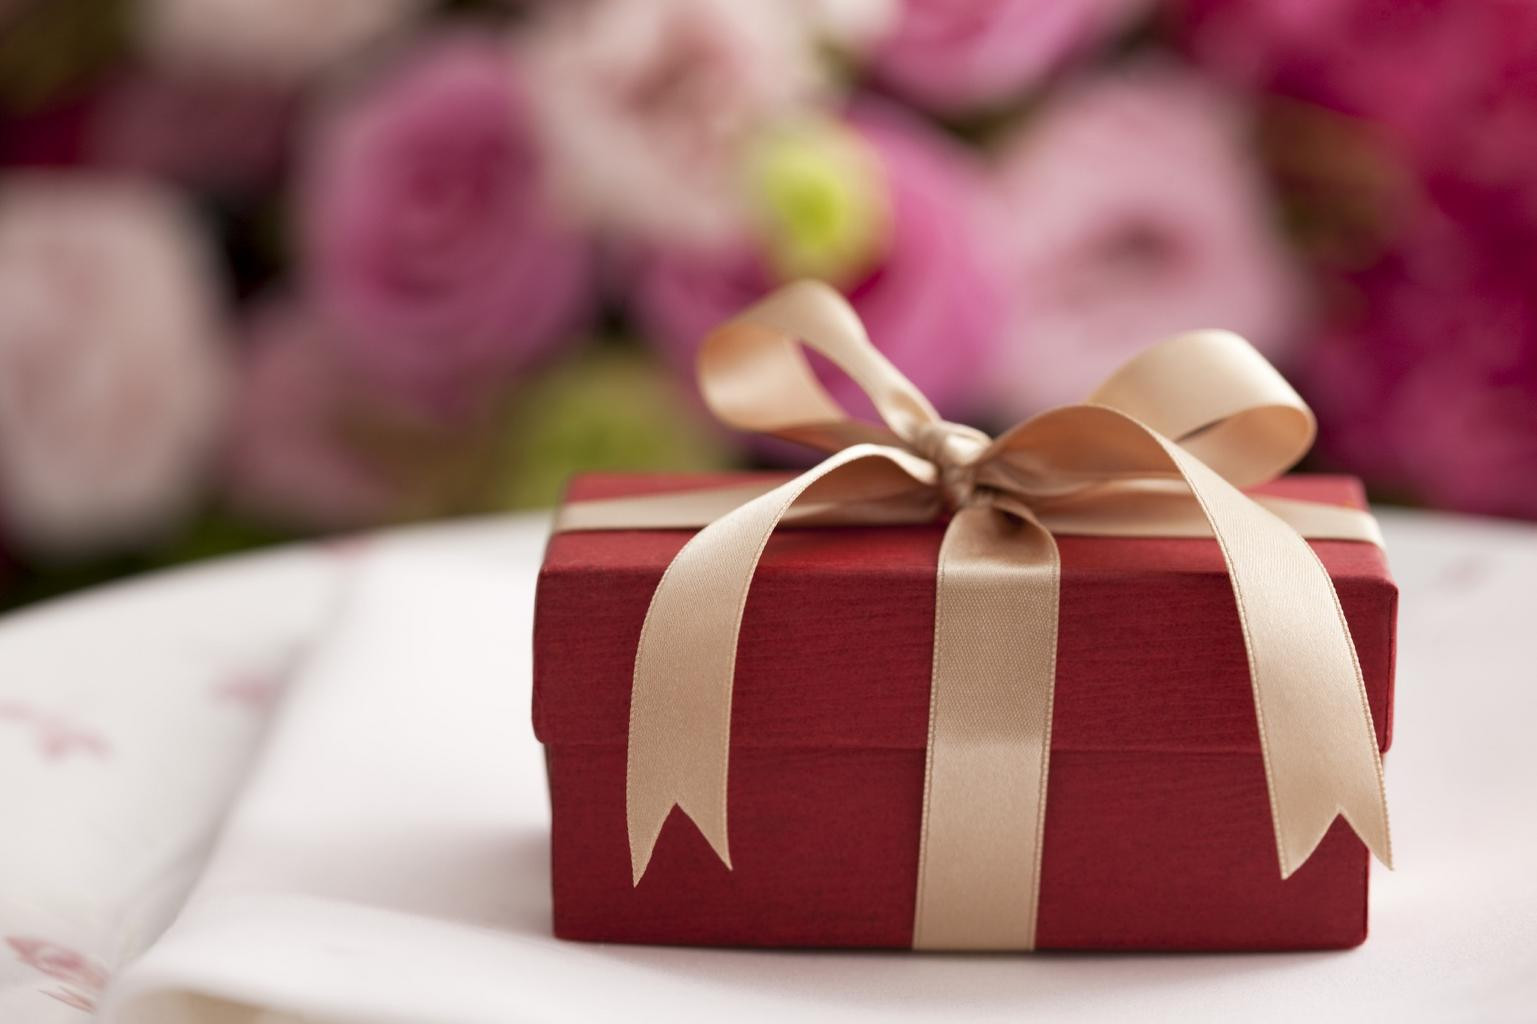 Top Ten Wedding Gifts
 10 Best Wedding Gift Ideas Newlyweds Would Love To Receive